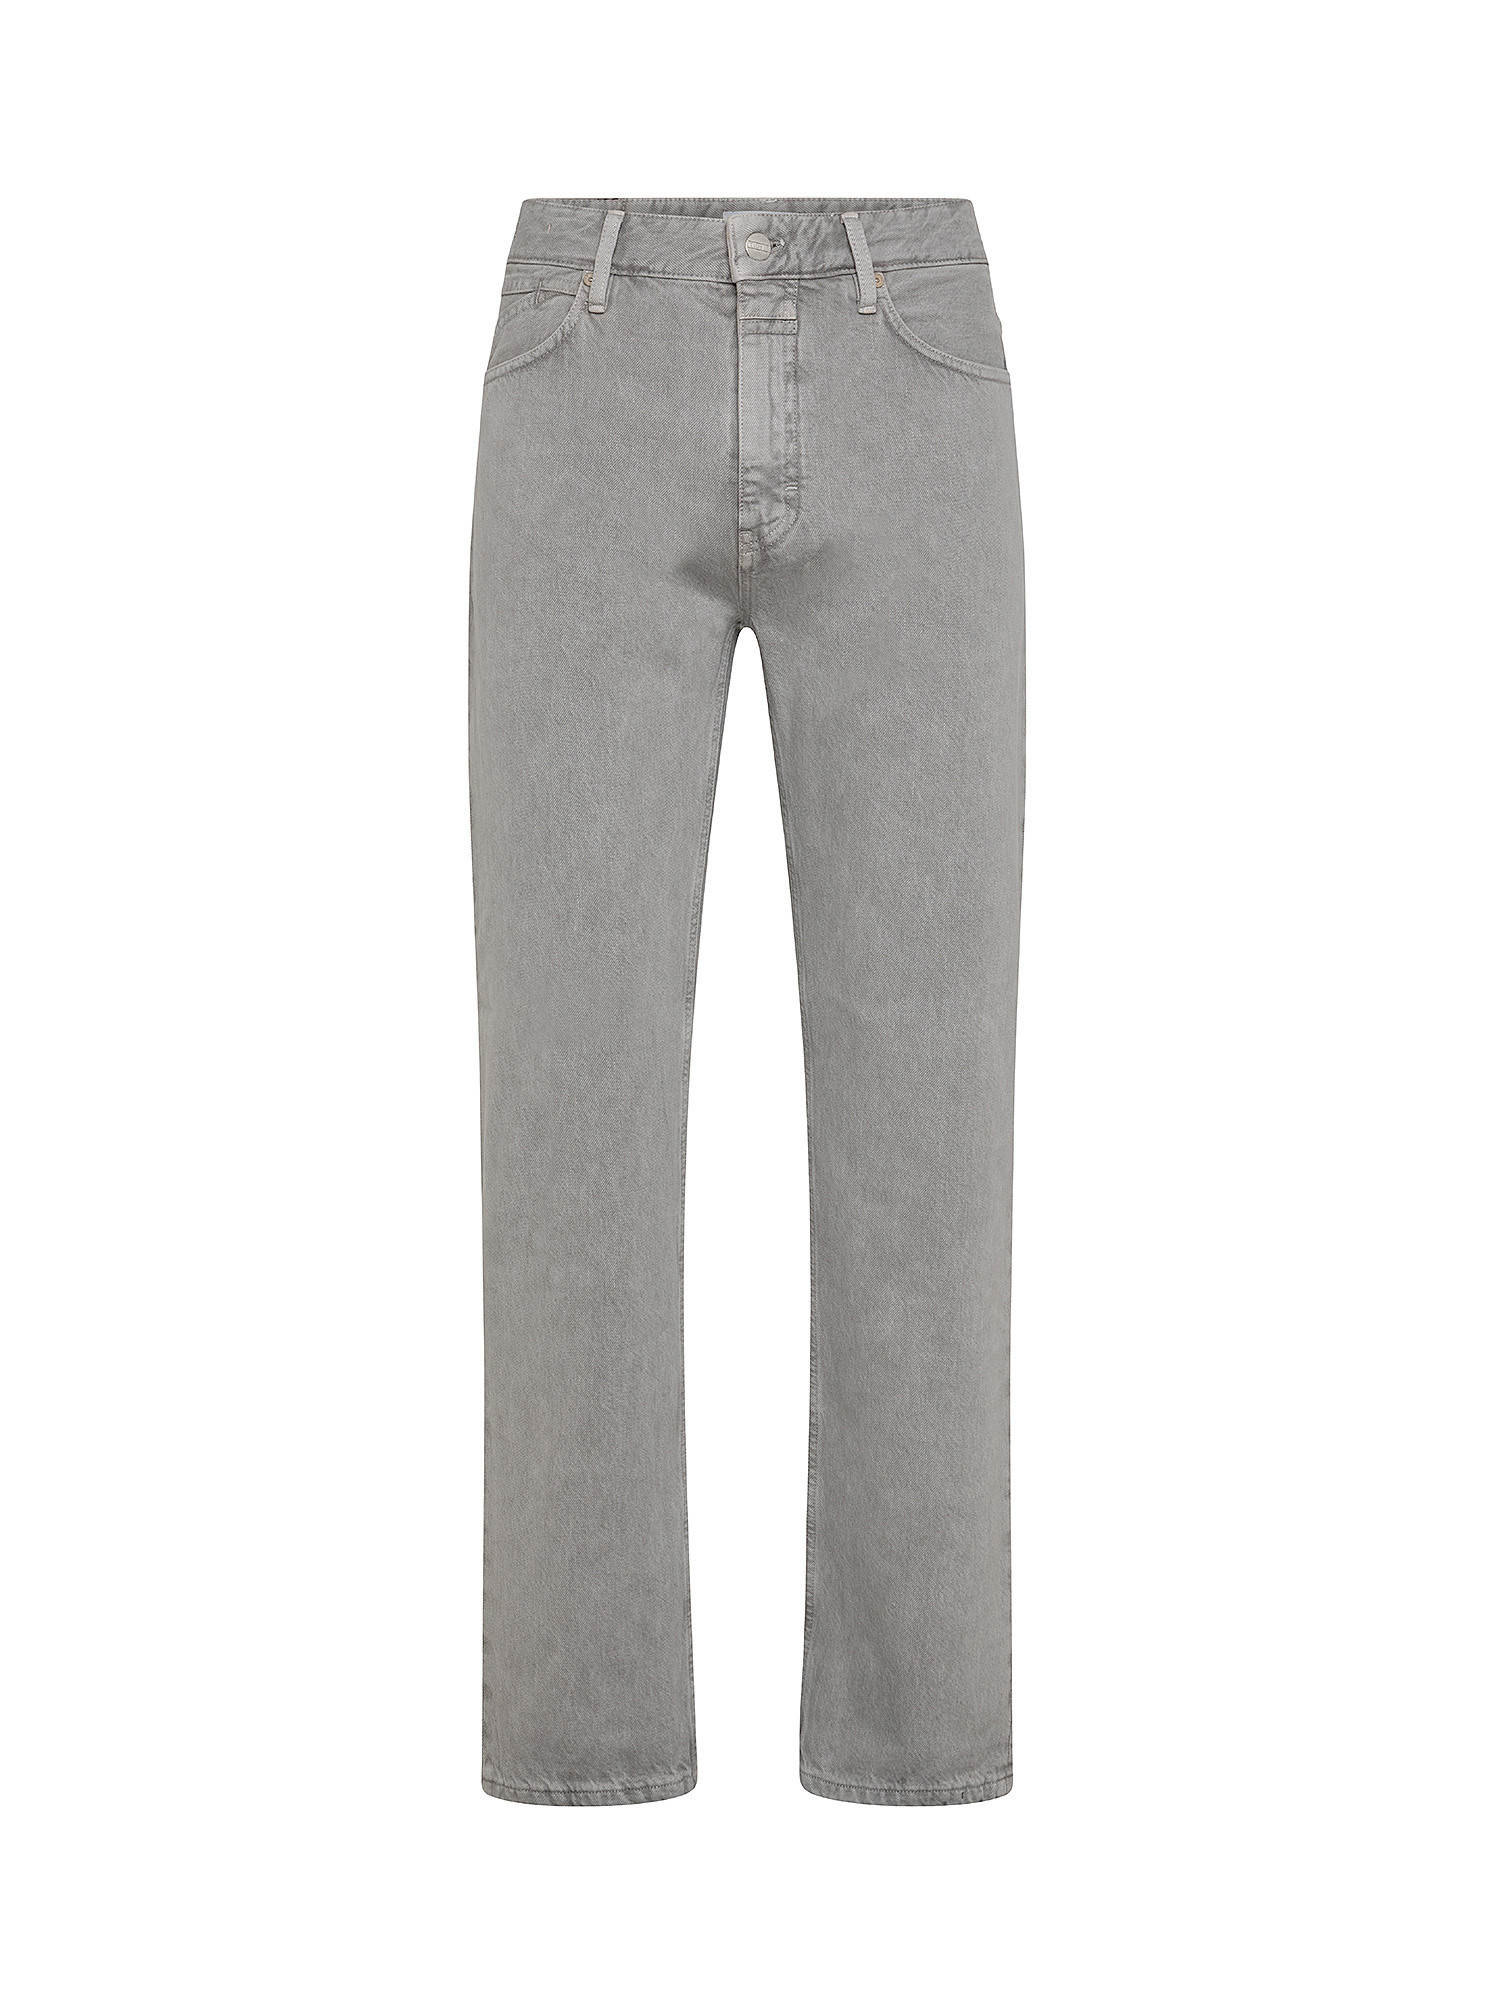 Jeans dritti, Grigio fumo, large image number 0